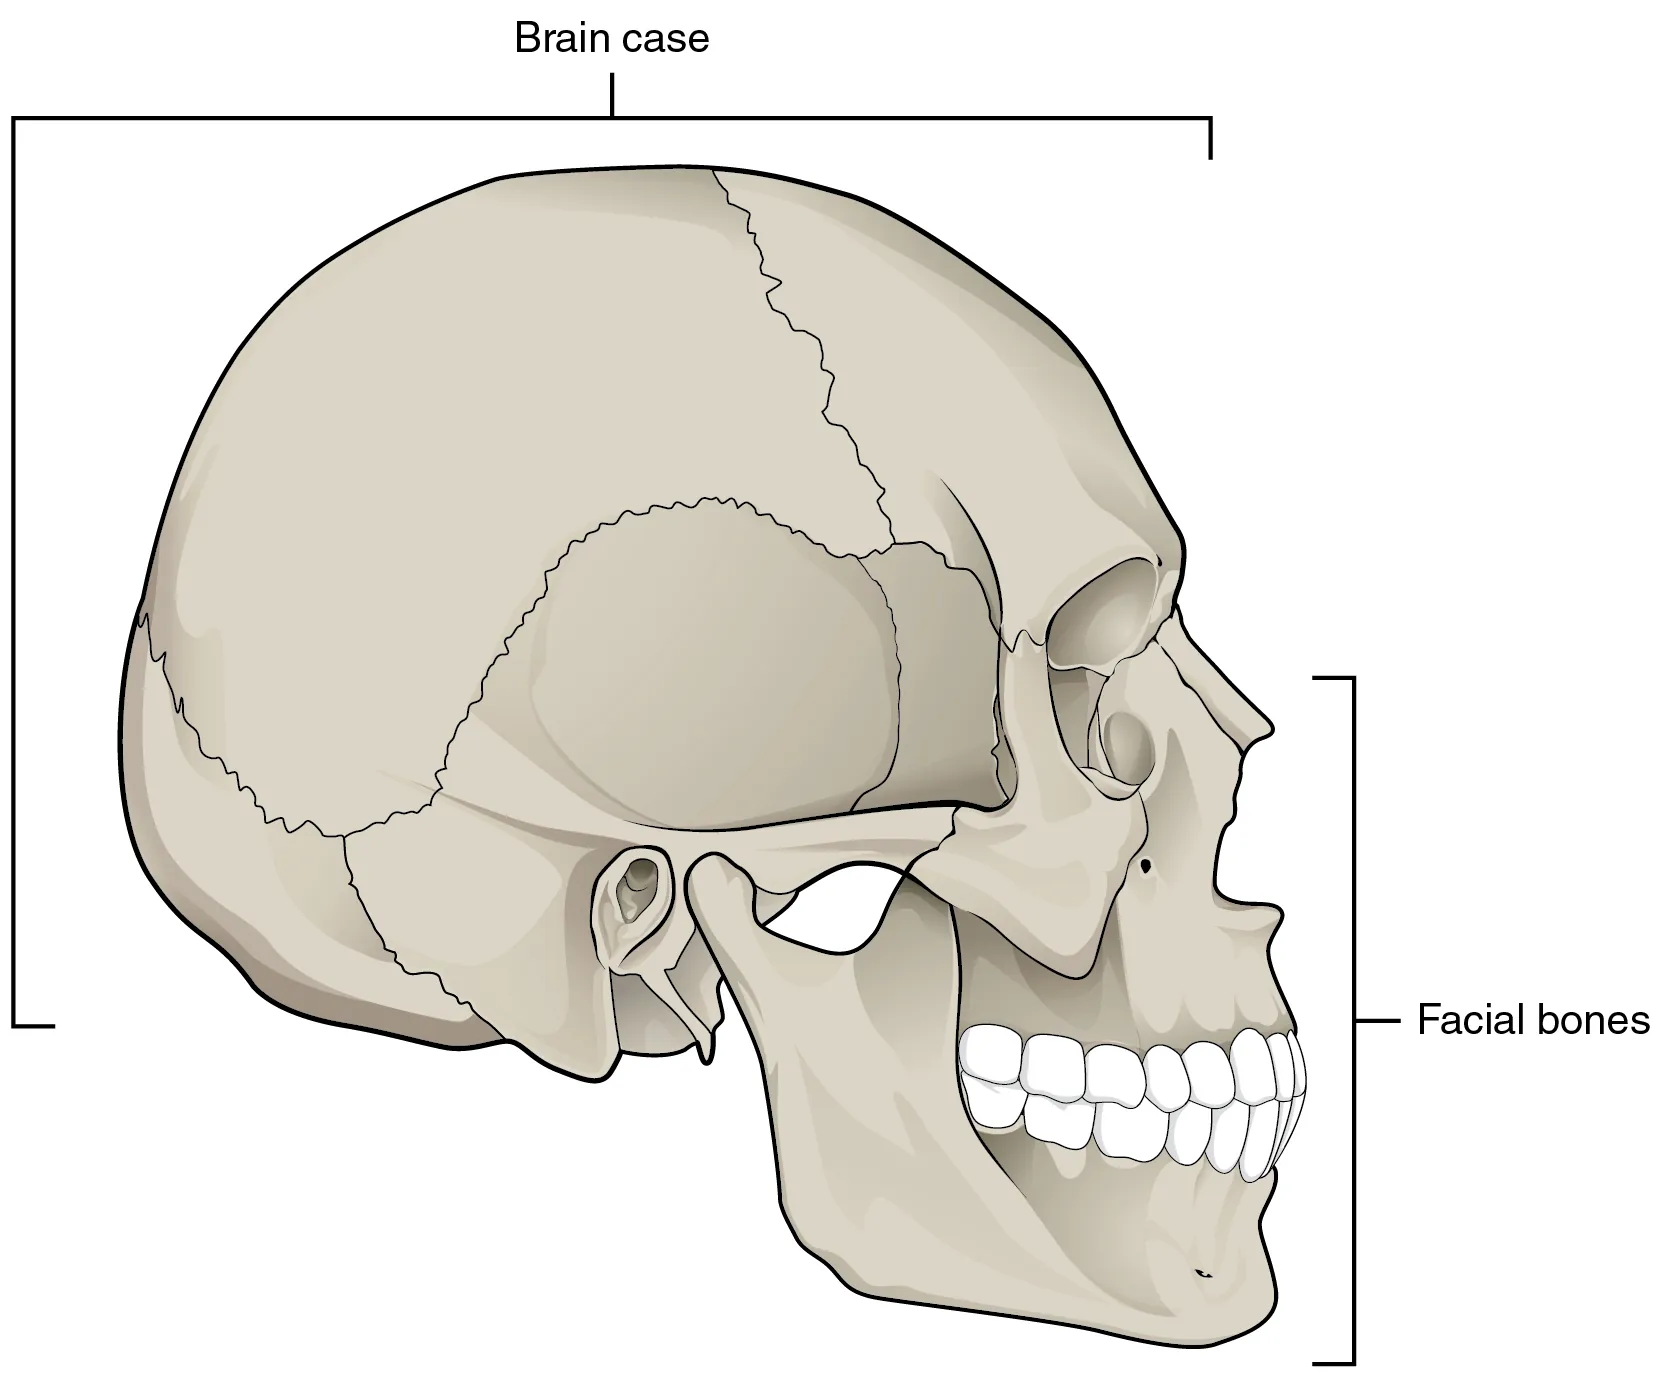 In this image, the lateral view of the human skull is shown and the brain case and facial bones are labeled.